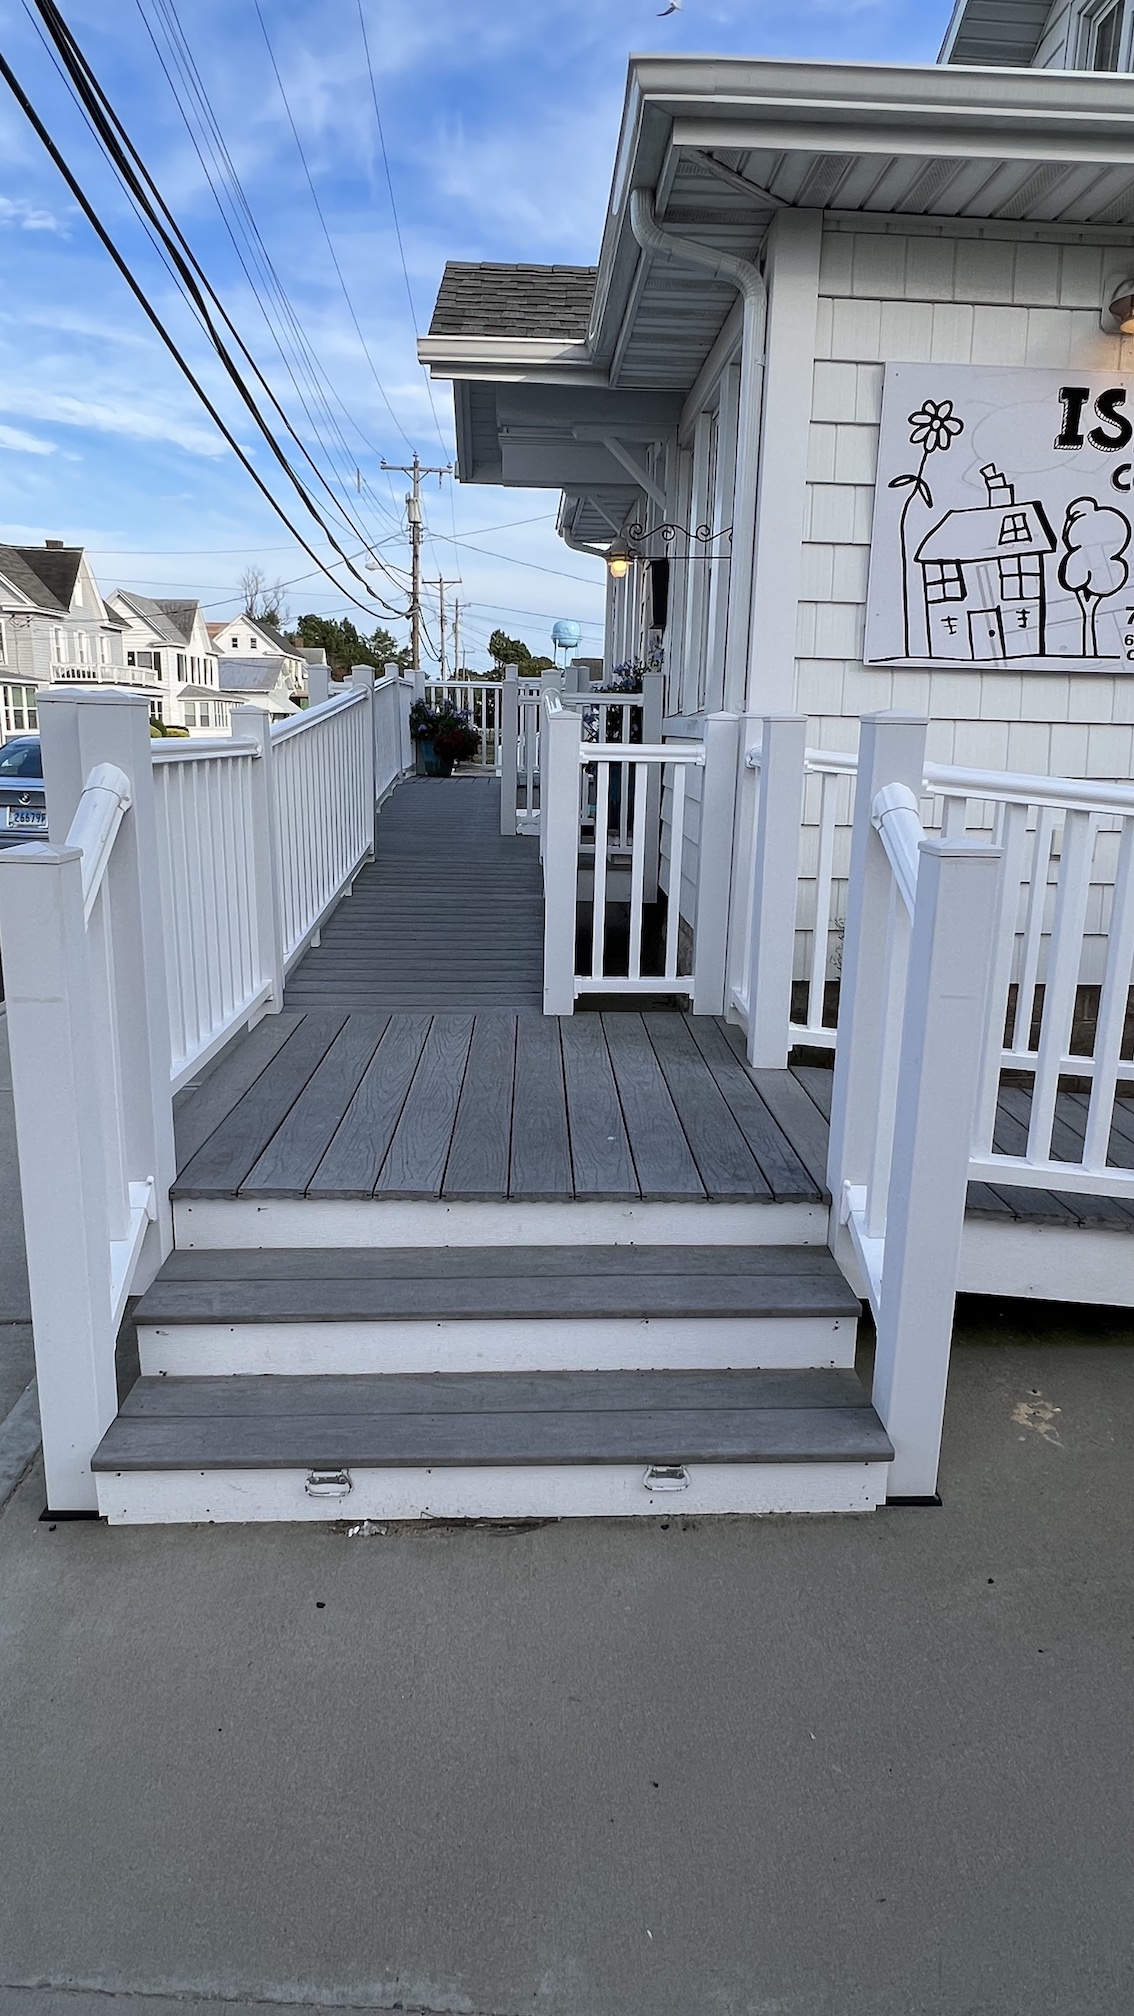 The steps and front porch of the Island Community House.